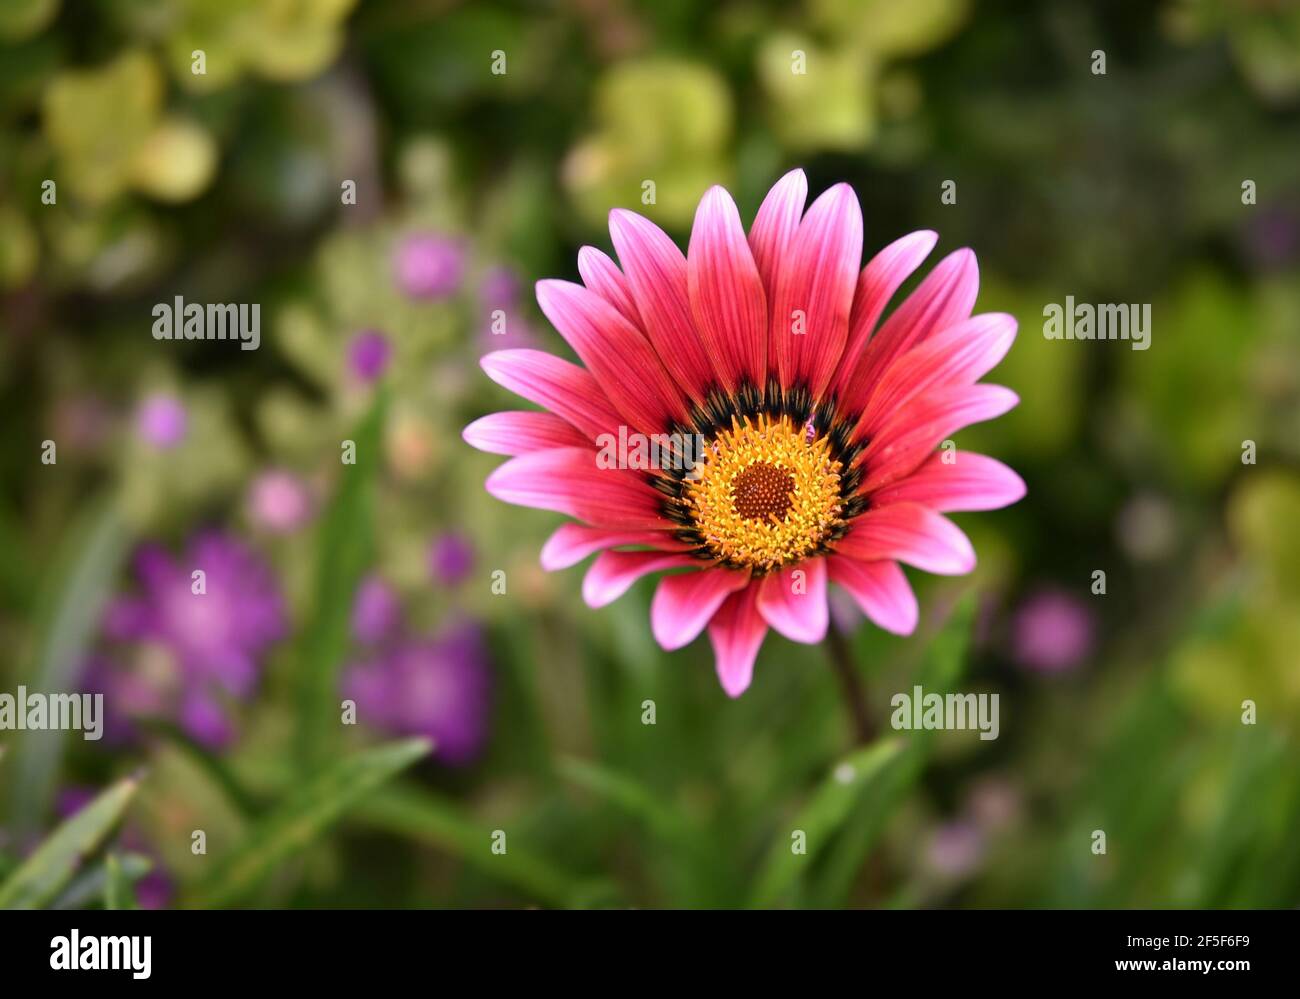 Gerbera daisy with two tone pink petals and yellow center on a natural green background. Stock Photo